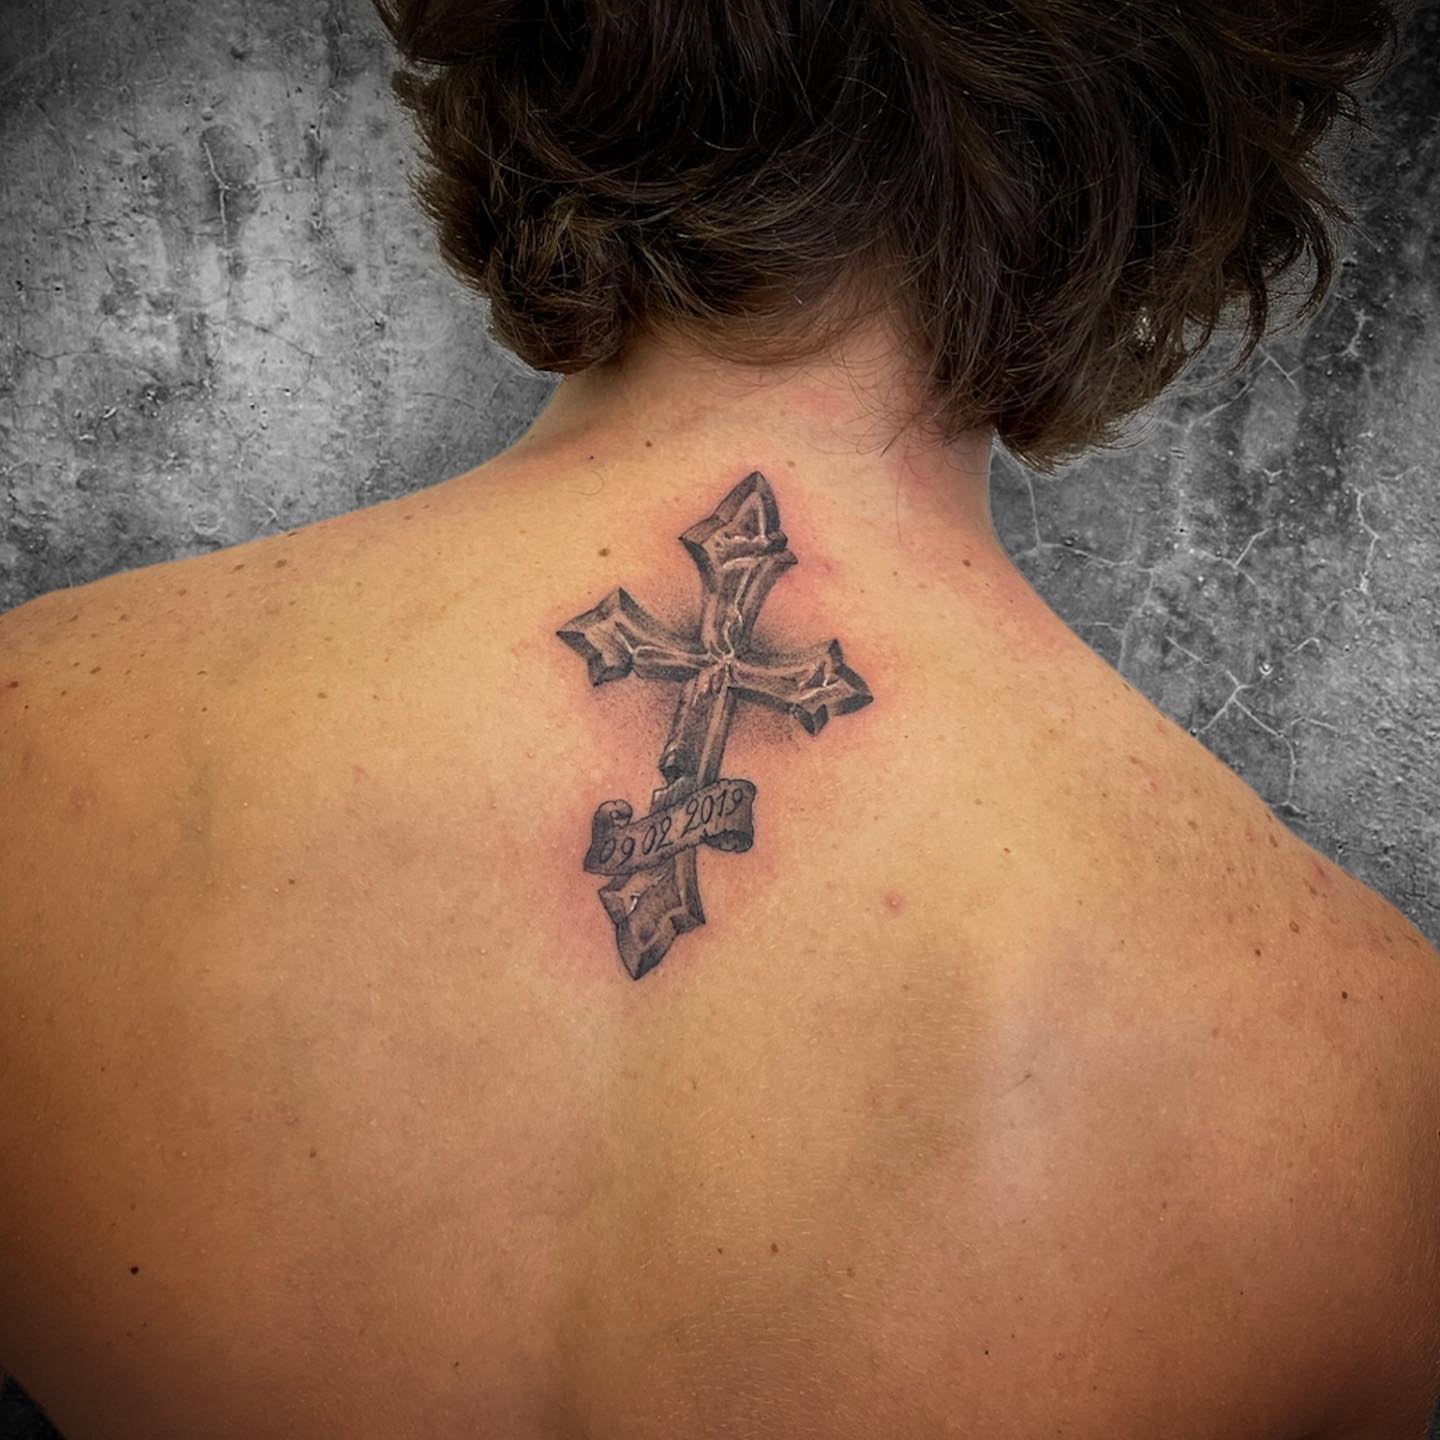 An ancient cross tattoo is ready to make you feel like you live in Middle Ages. This middle size cross above has perfect shading effects, so it offers a realistic look. As a nice detail, you can have your birth date written below it.